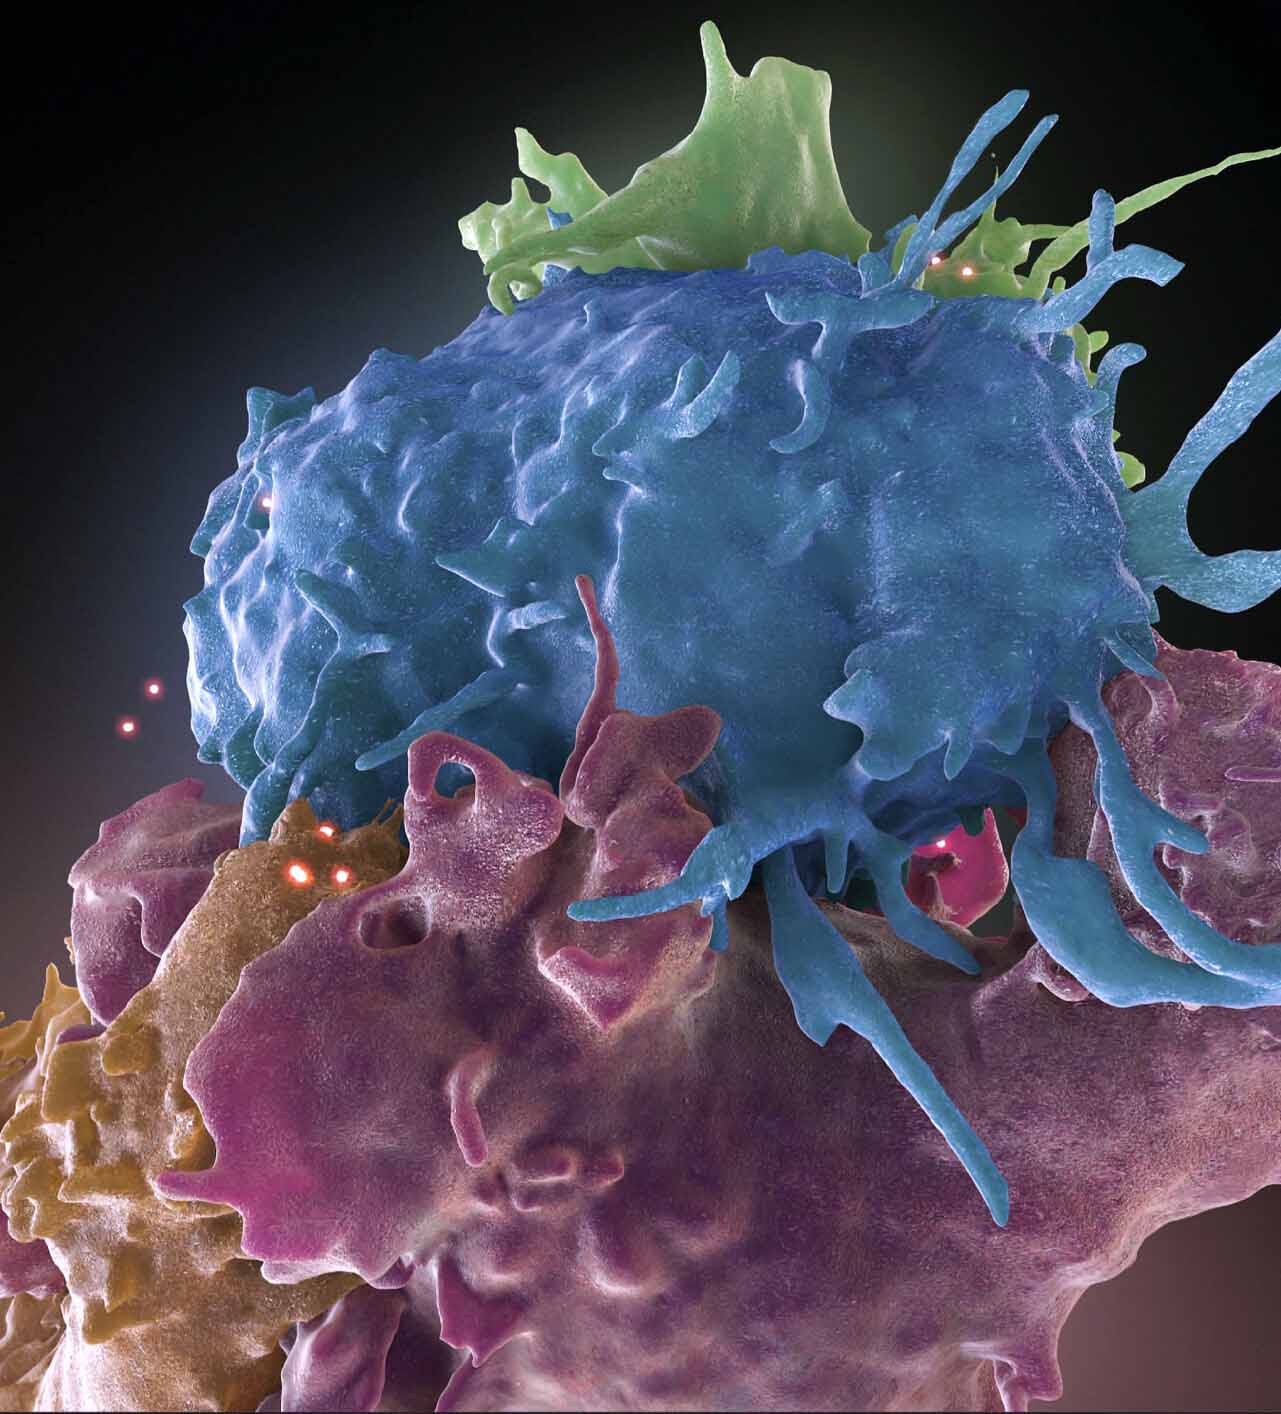 HIV infected and uninfected immune cells interact